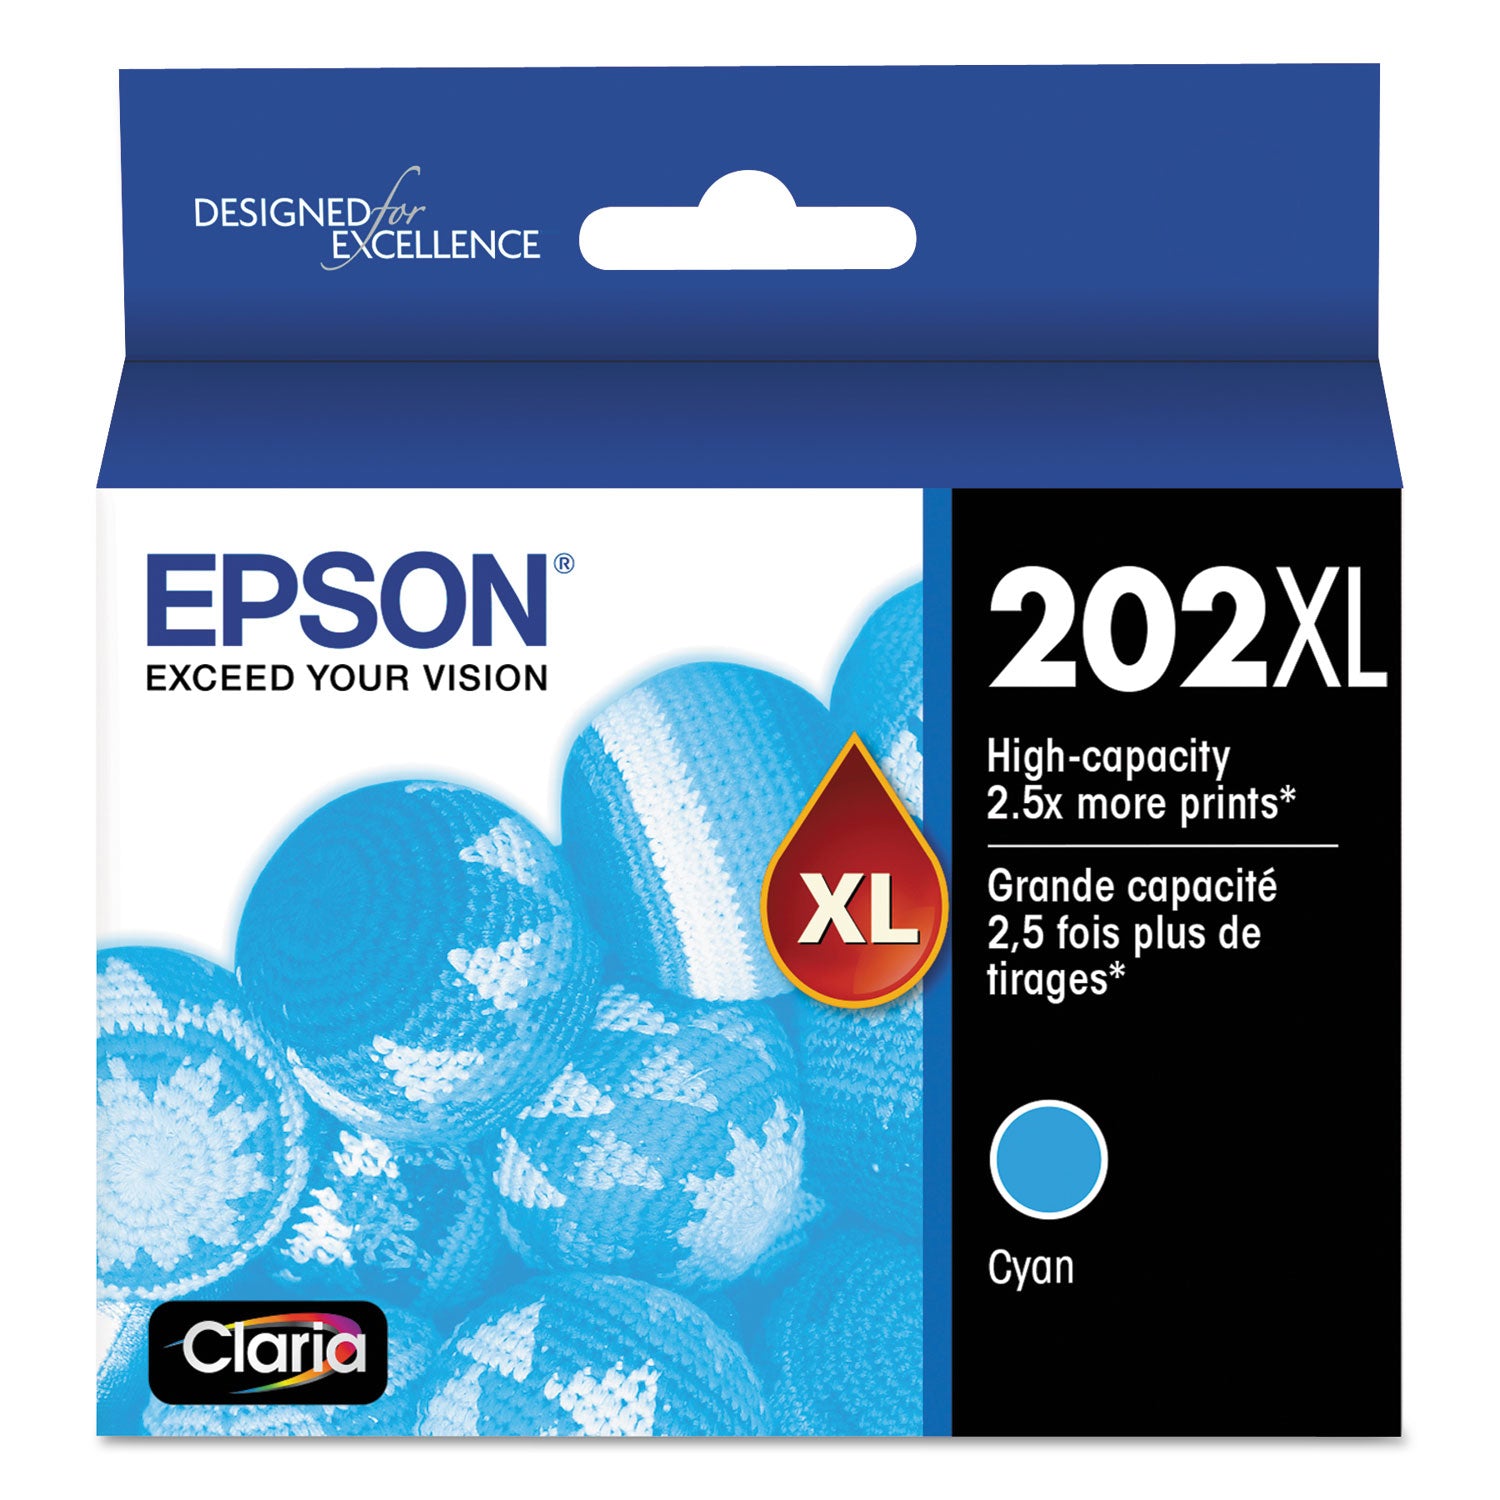 t202xl220-s-202xl-claria-high-yield-ink-470-page-yield-cyan_epst202xl220s - 1